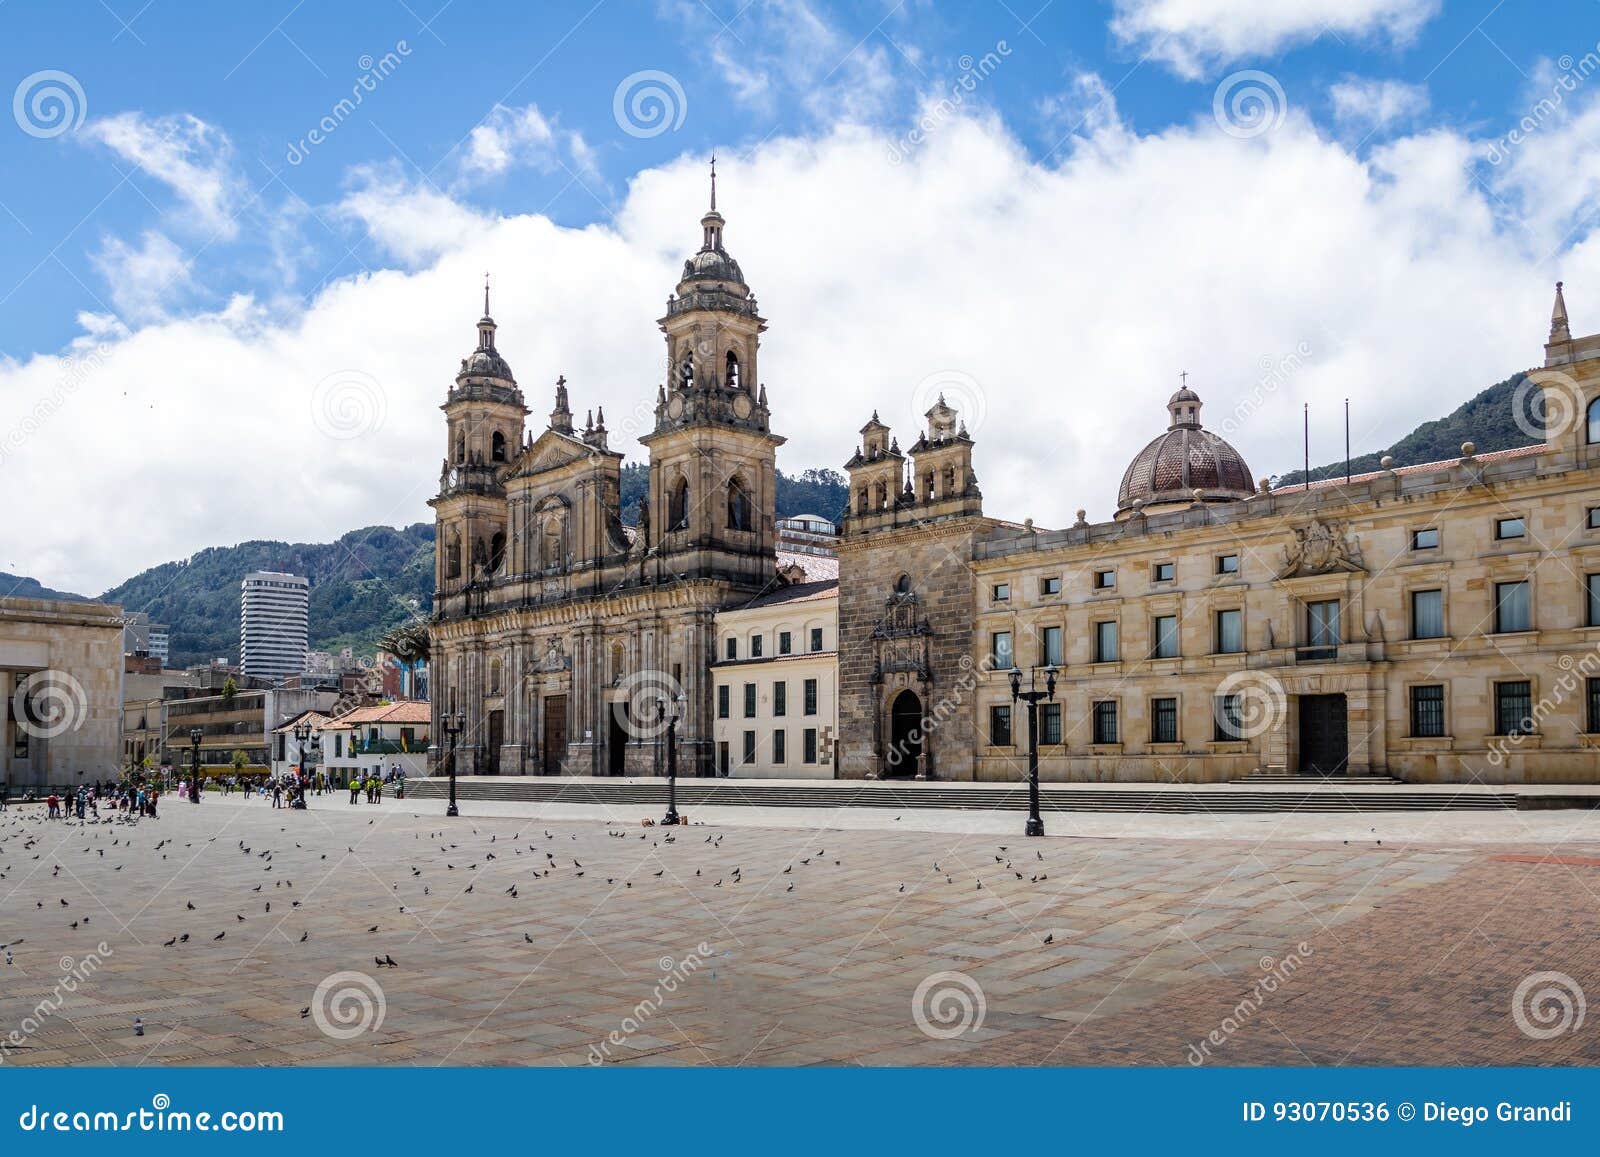 bolivar square and cathedral - bogota, colombia